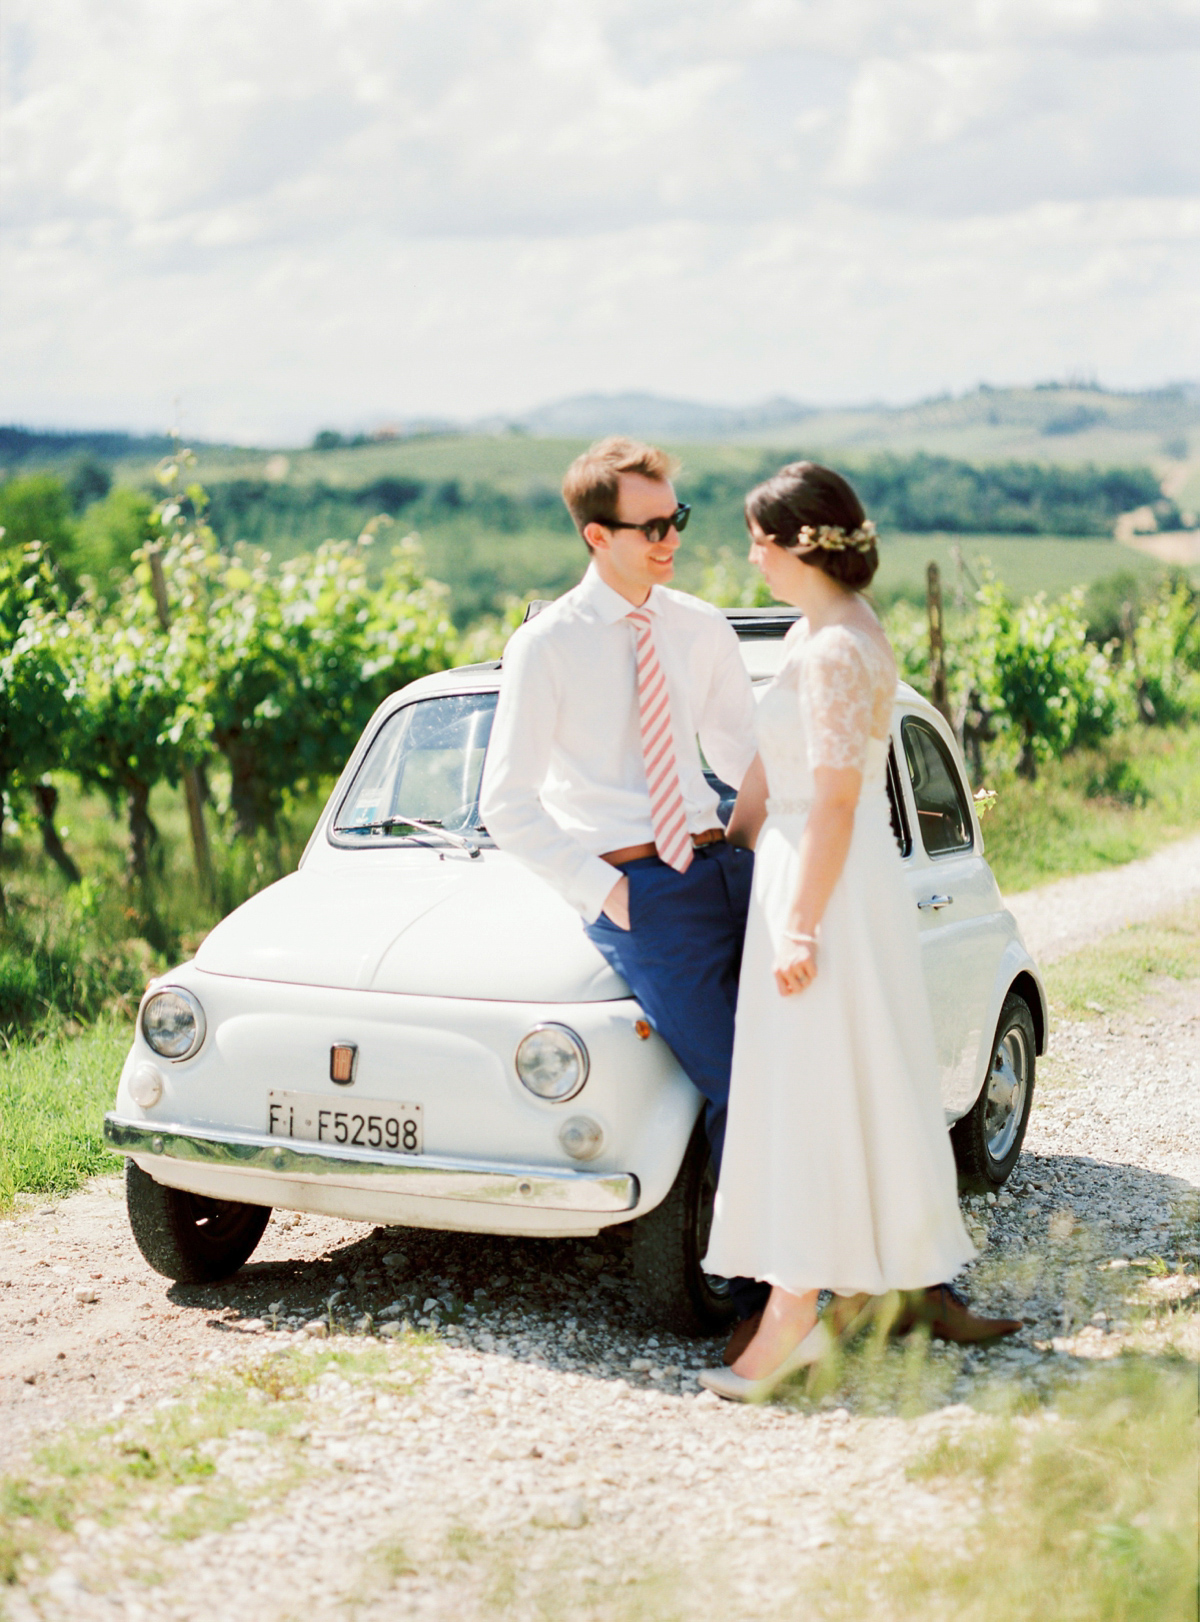 Our Lovettes member and bride Kate wore a 1950's inspired short gown for her wedding in the rural Italian countryside. Photography by Gert Huygaerts.